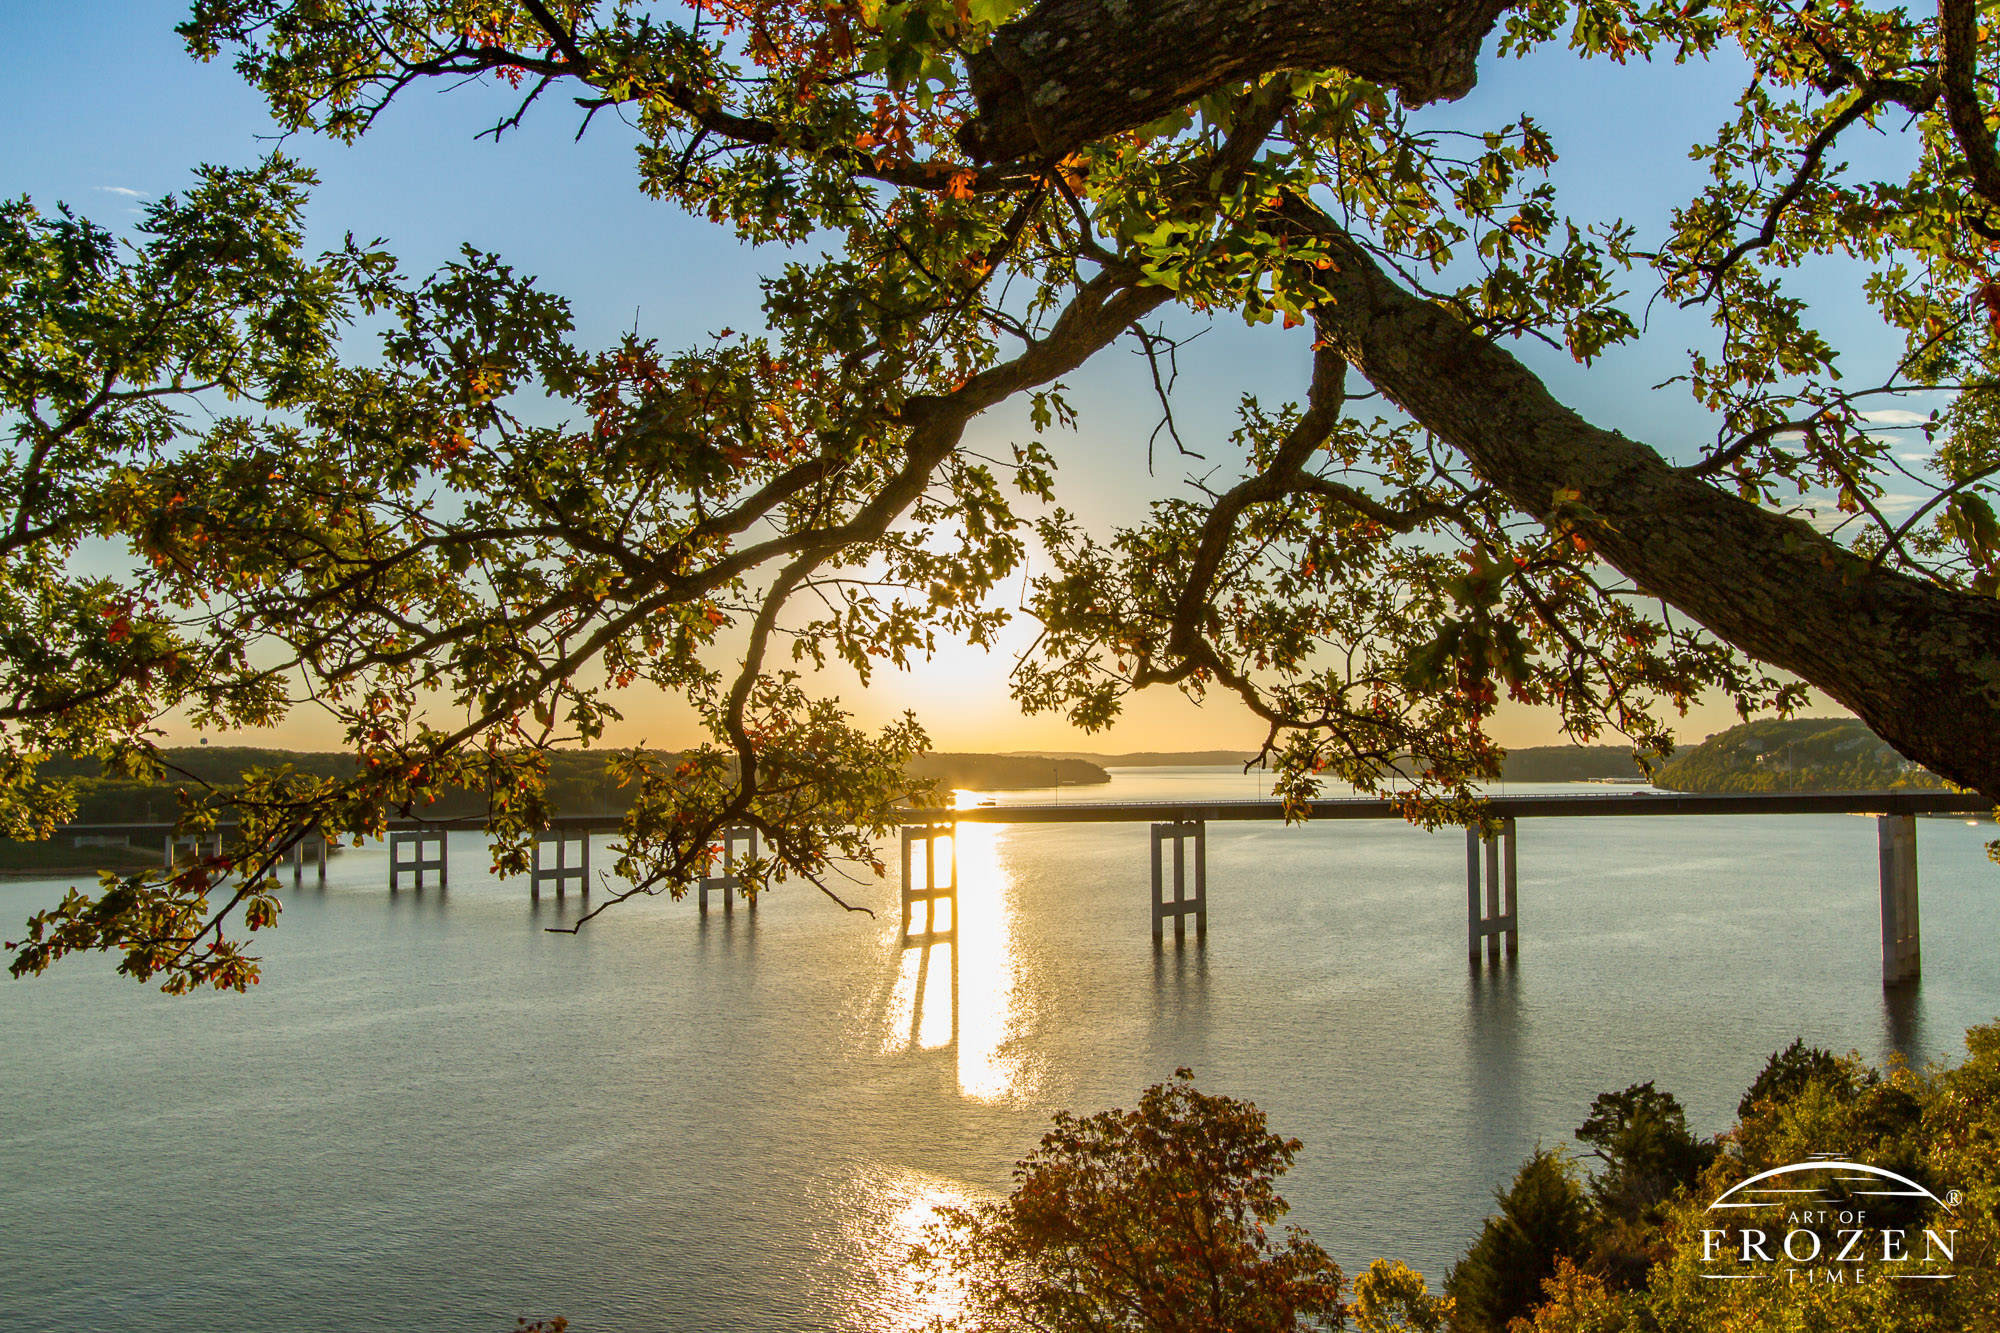 A back lit oak tree hanging over Shawnee Bluff at sunset as the Lake of the Ozarks Community Bridge crosses the lake and is silhouetted by the sun’s golden light.